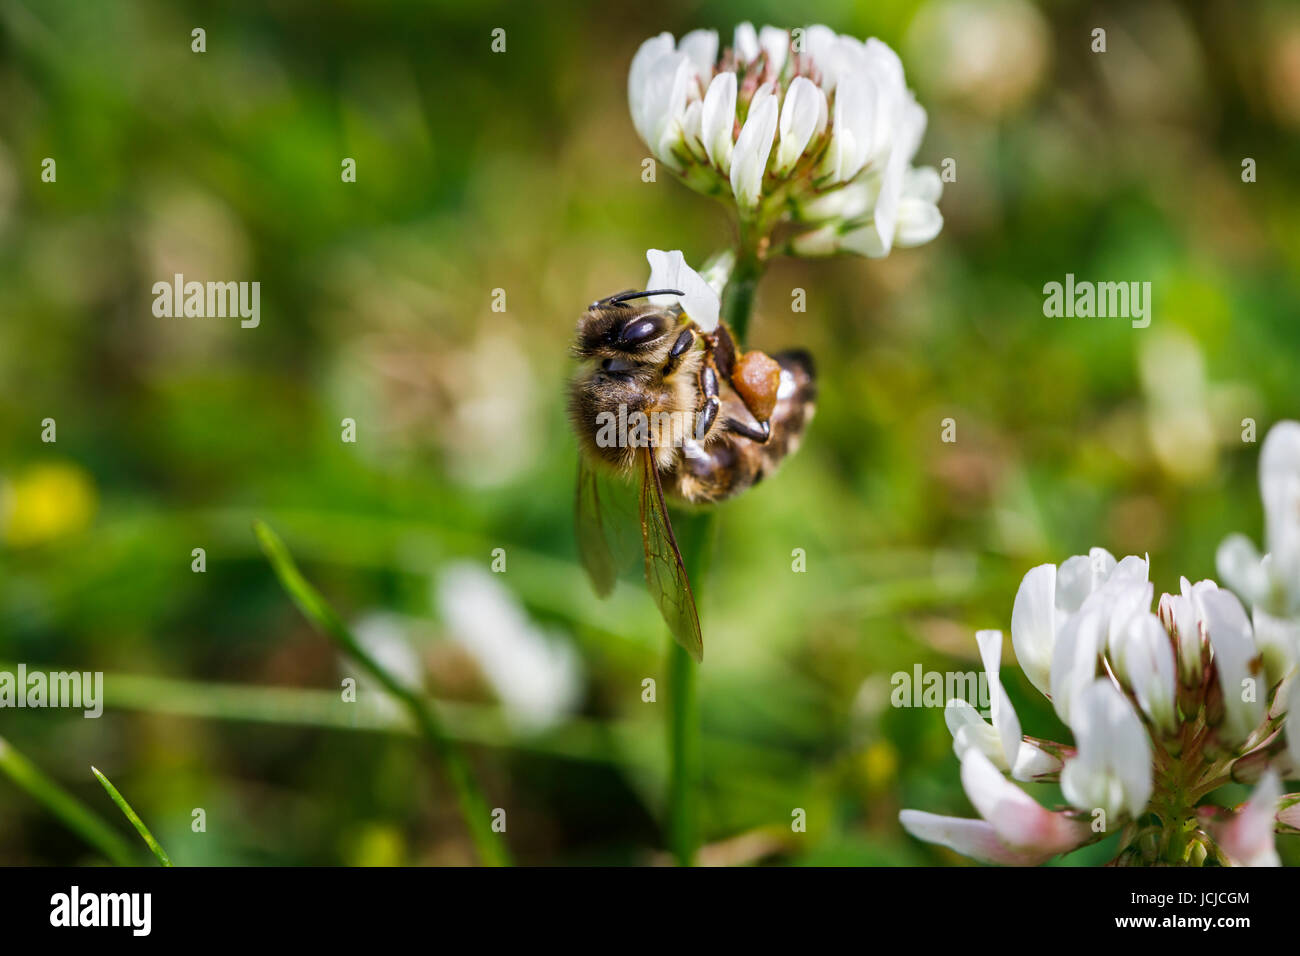 Western honey bee or European honey bee (Apis mellifera) collects nectar, pollen from and pollinates clover in early summer in southeast England, UK Stock Photo